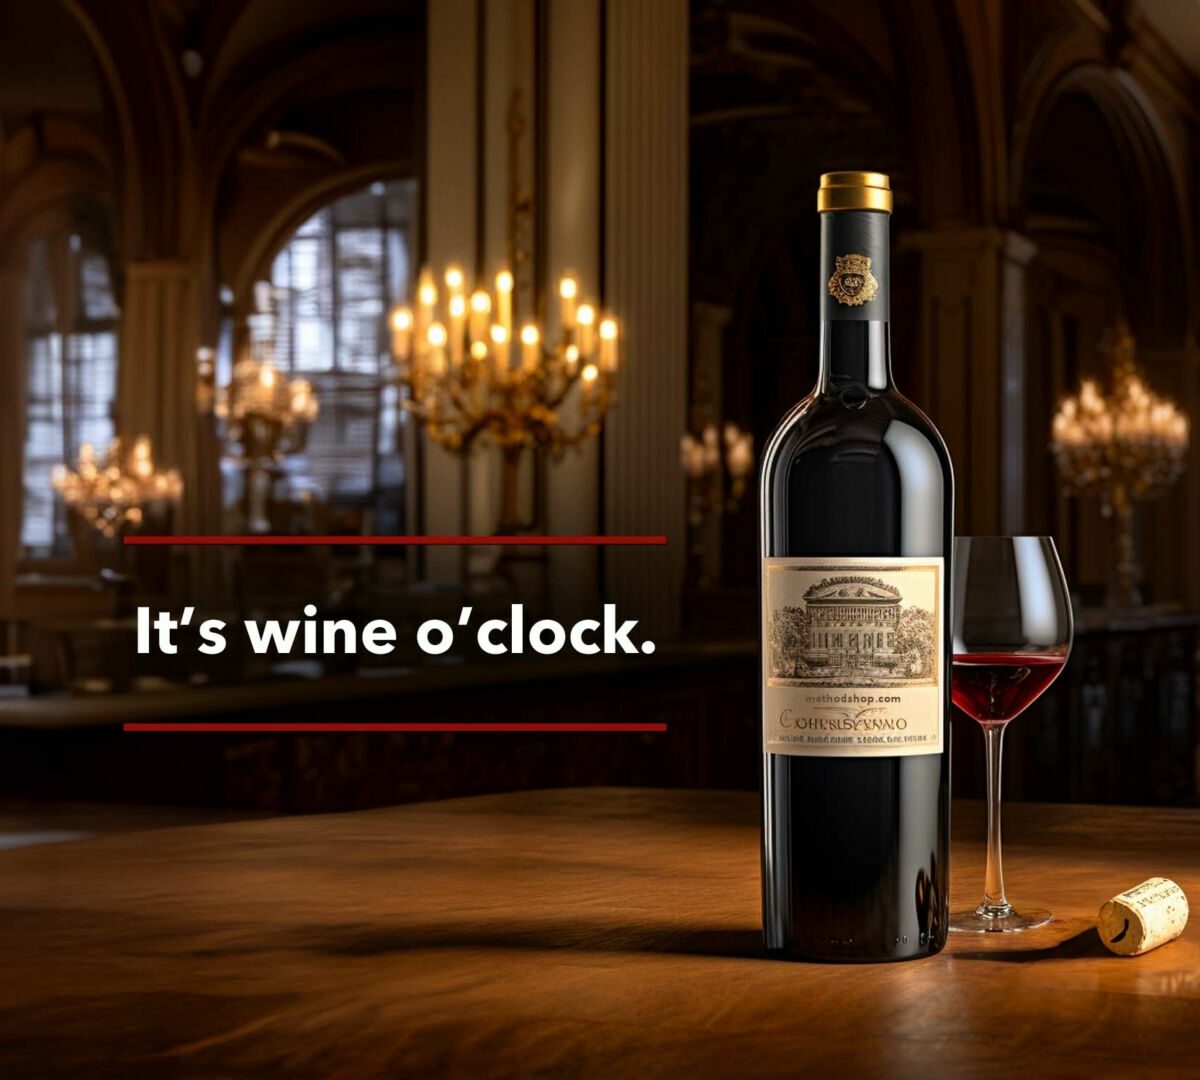 A Large Bottle Of Red Wine And A Poured Glass Of Red Wine With A Graphic That Says Wine Jokes - It'S Wine O'Clock